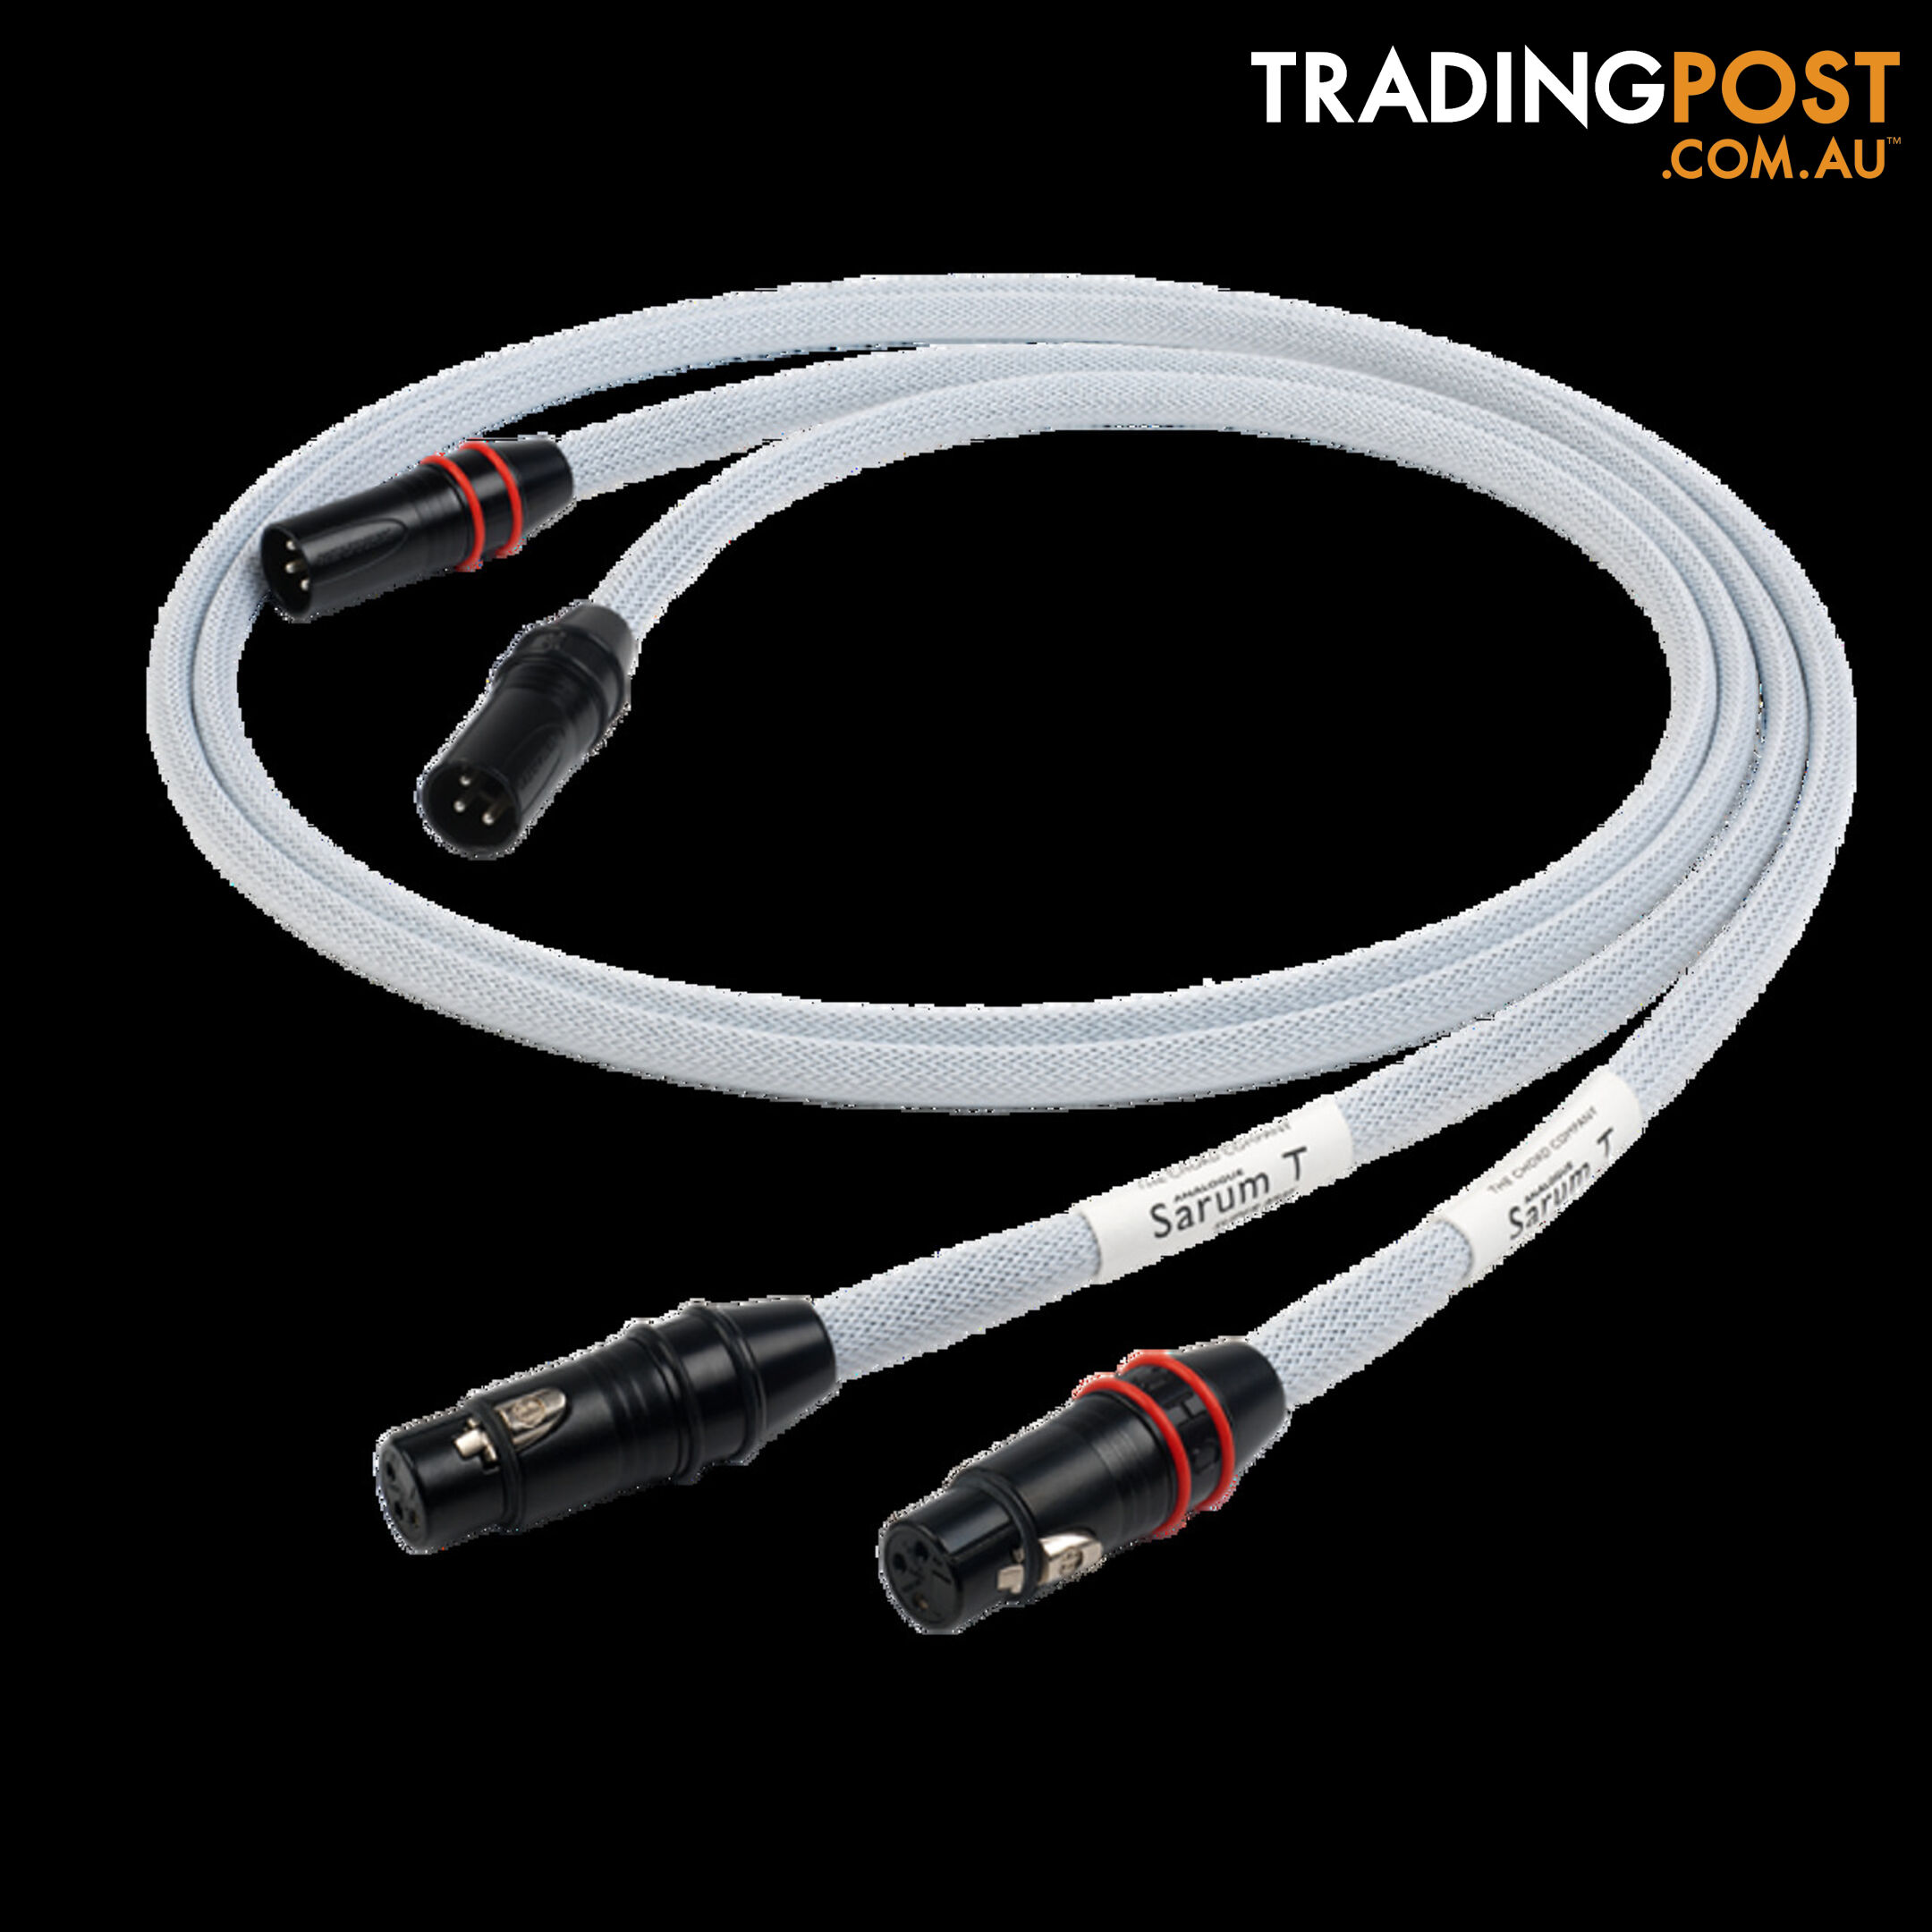 Chord Sarum T ARAY Analogue XLR Interconnect Cable 1m (Pair)